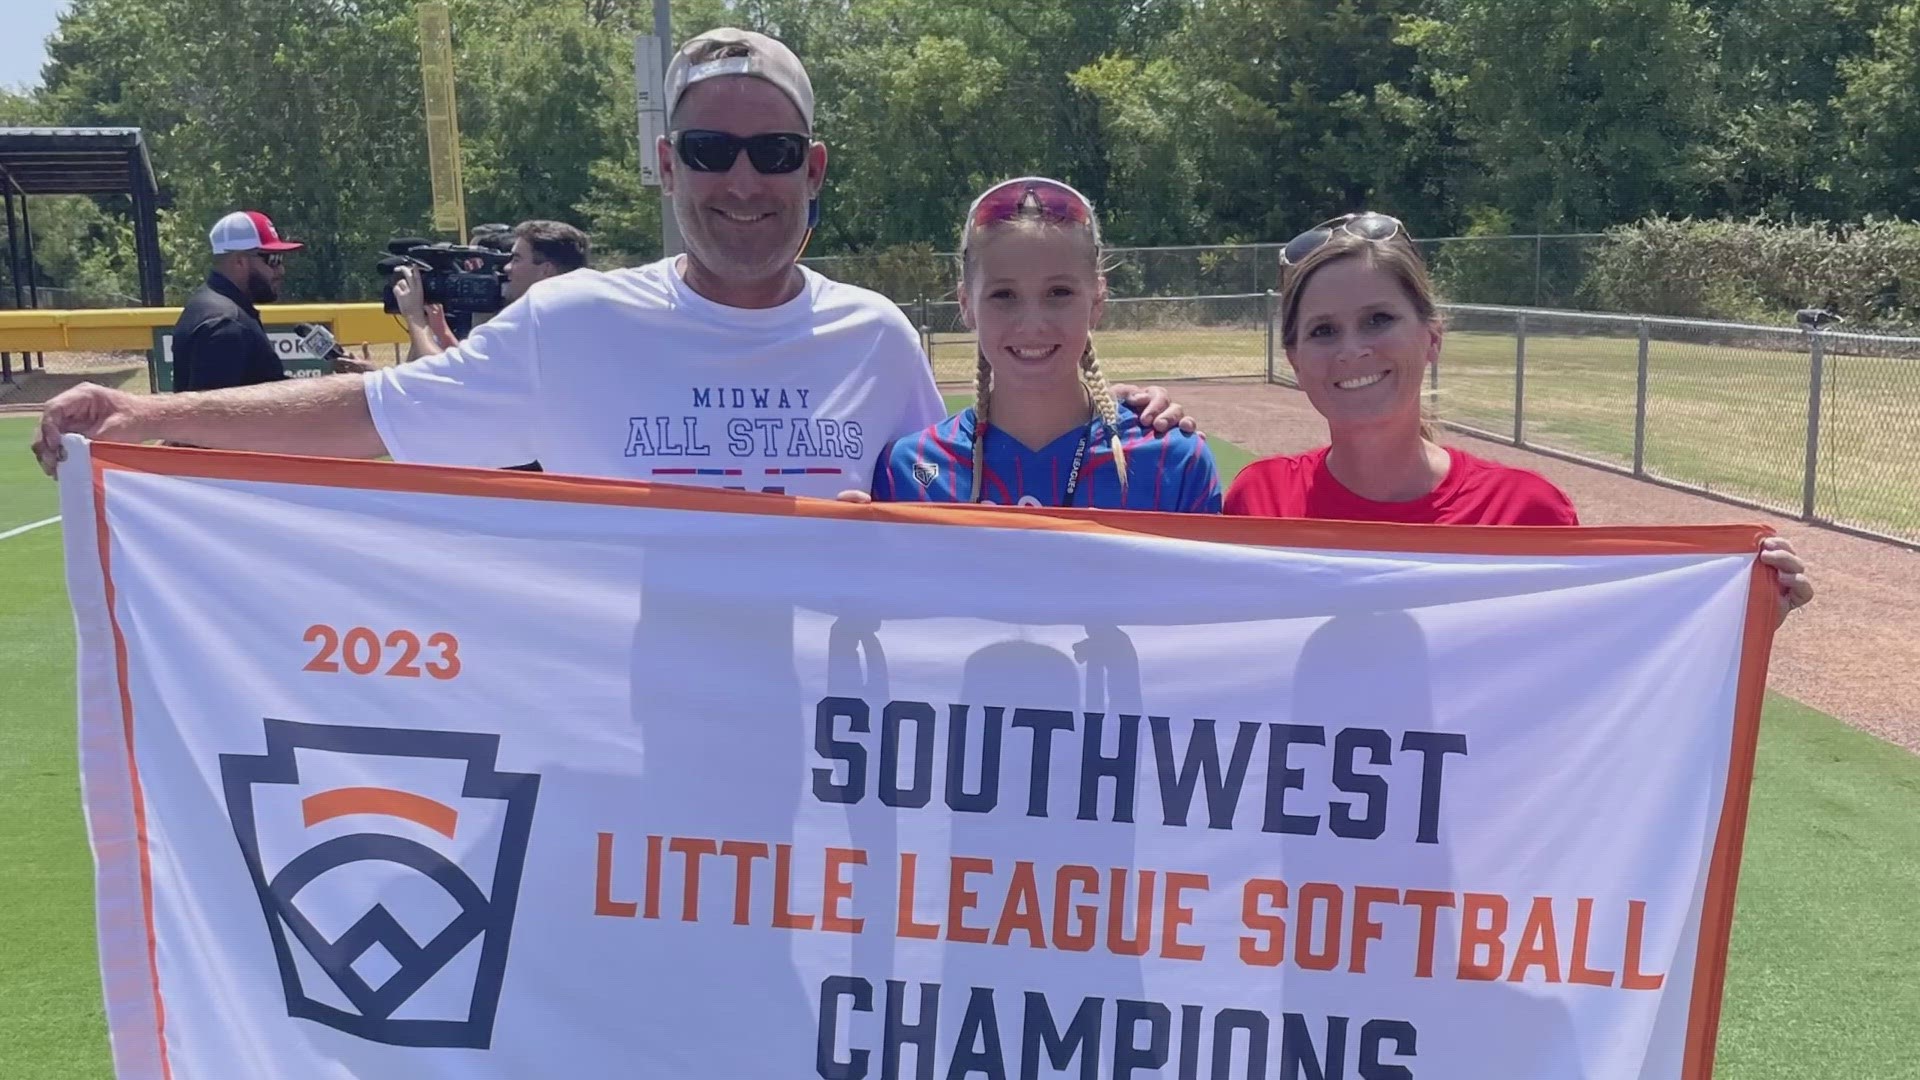 After bringing home a championship banner last year, the Midway softball little league all star team is looking to defend their world series title in North Carolina